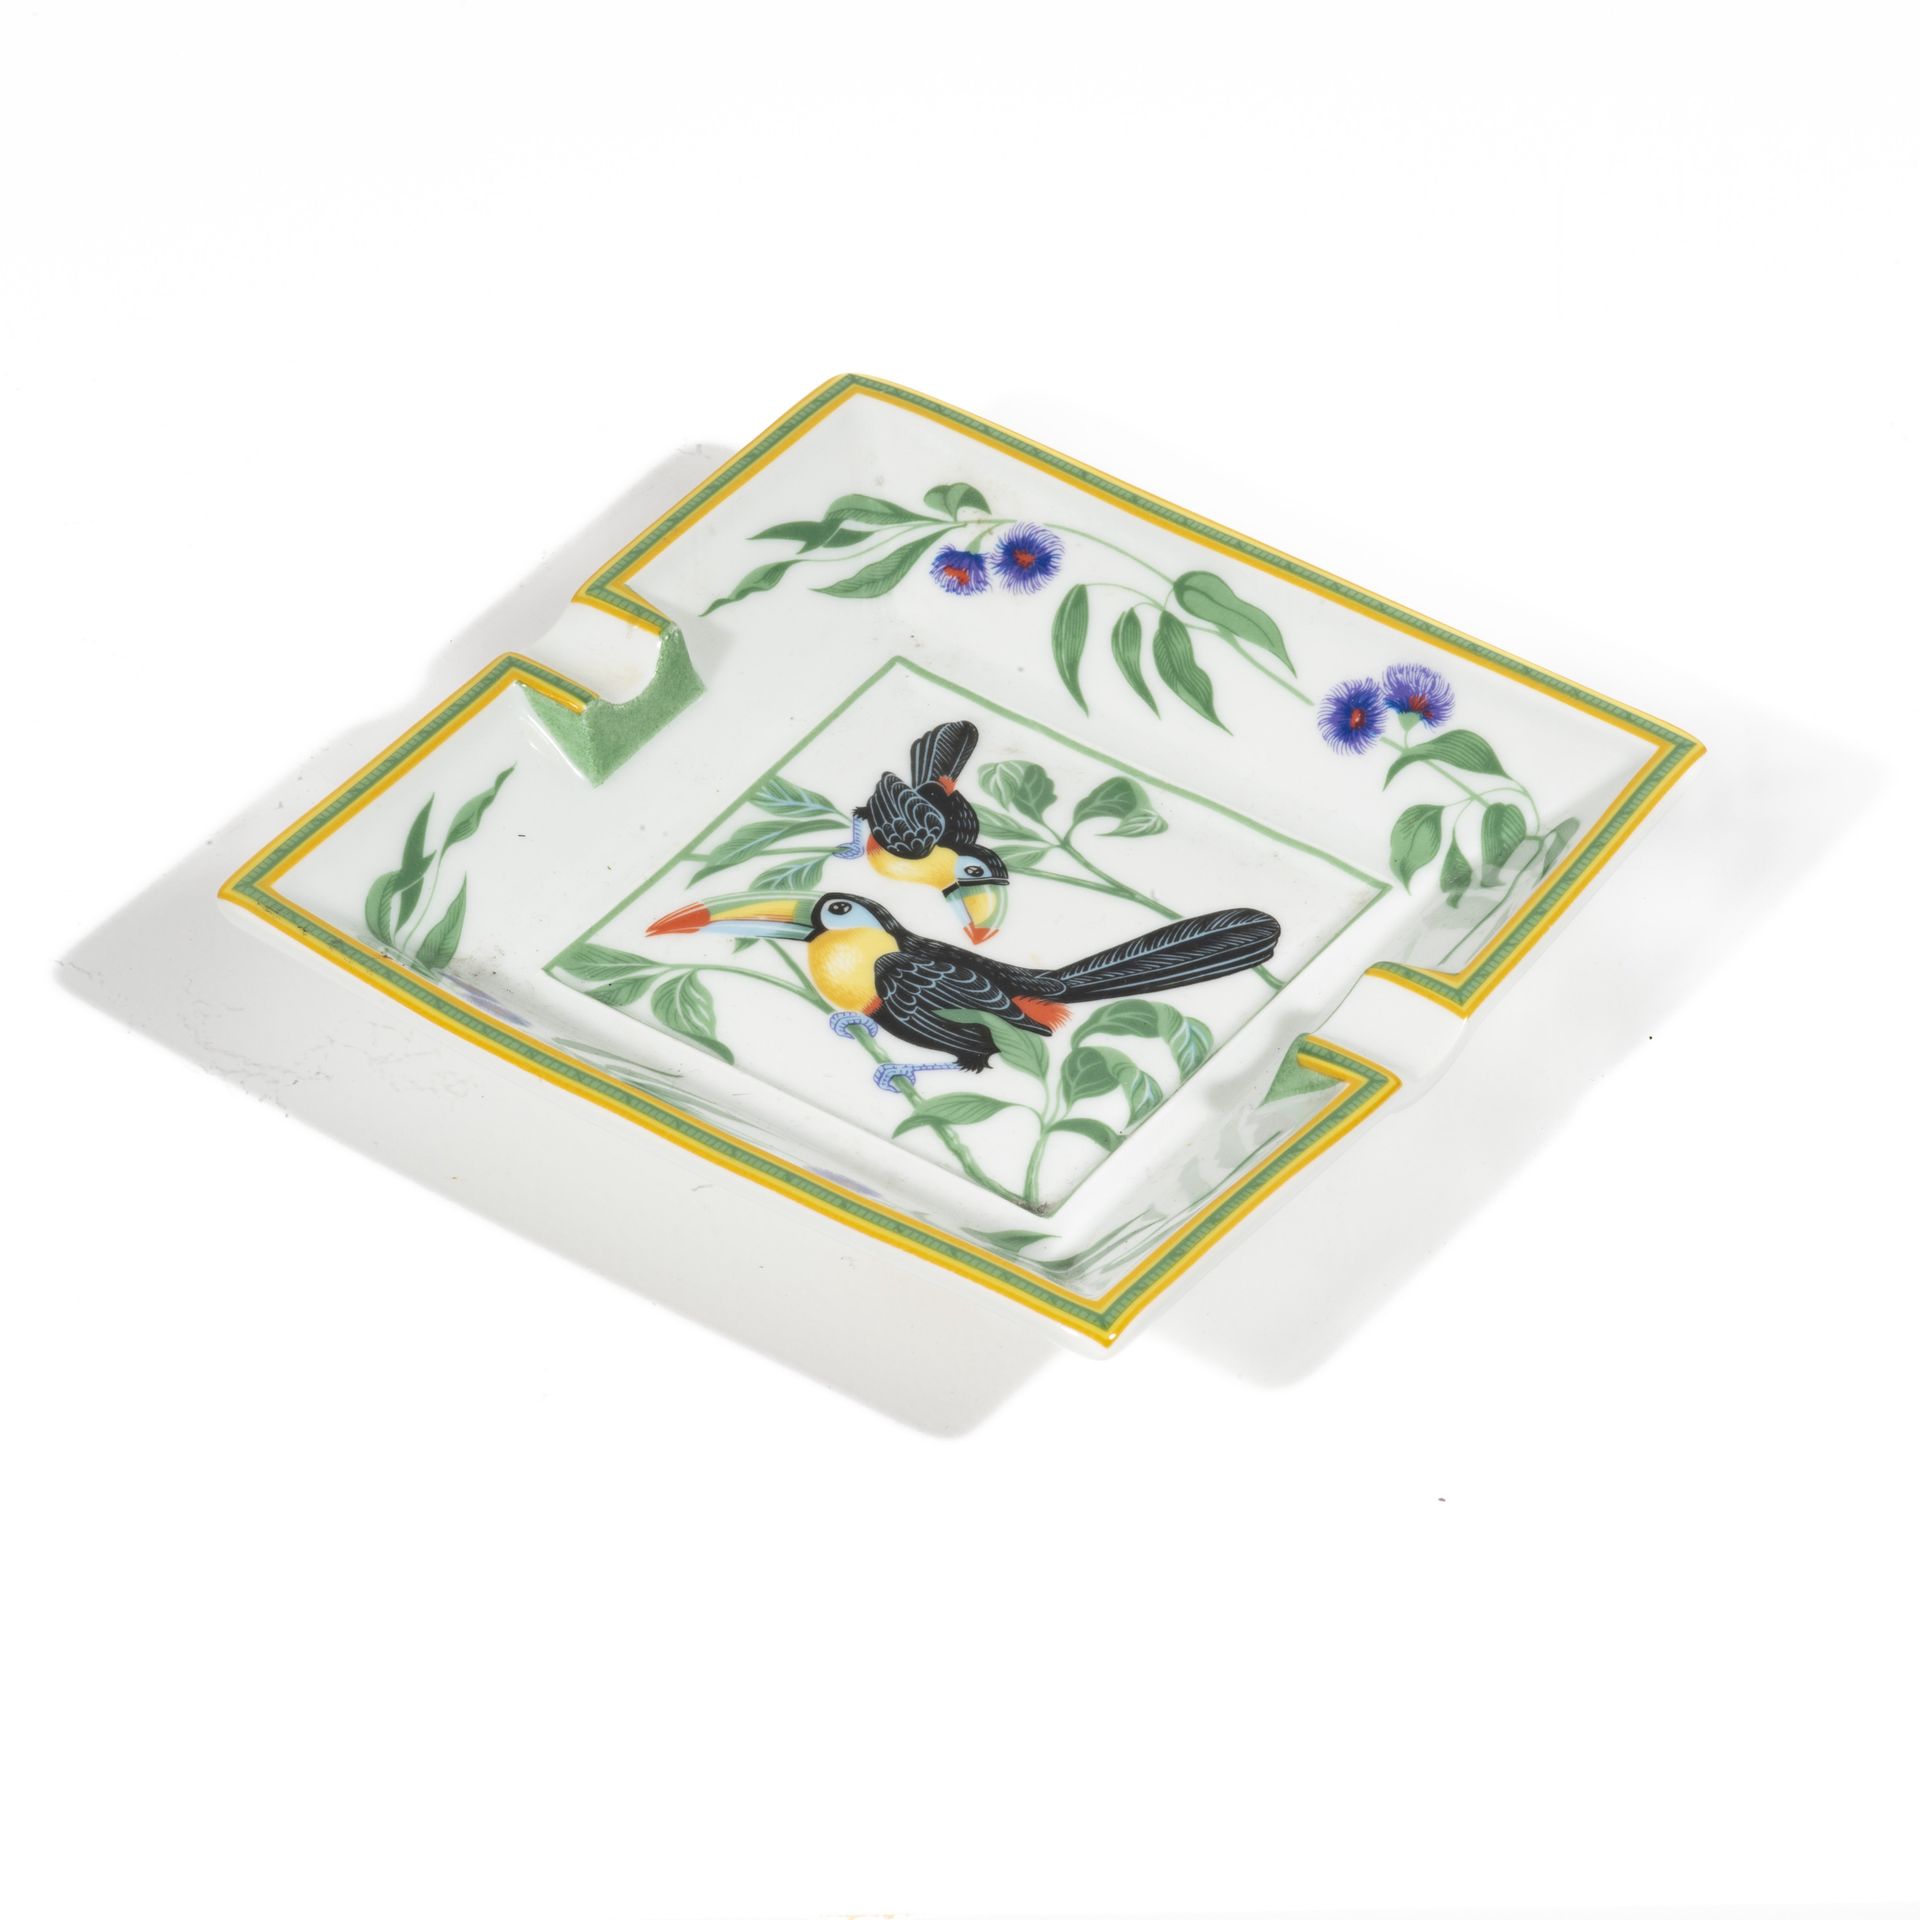 Null HERMES Paris, made in France. Square ashtray 'Toucans
In polychrome porcela&hellip;